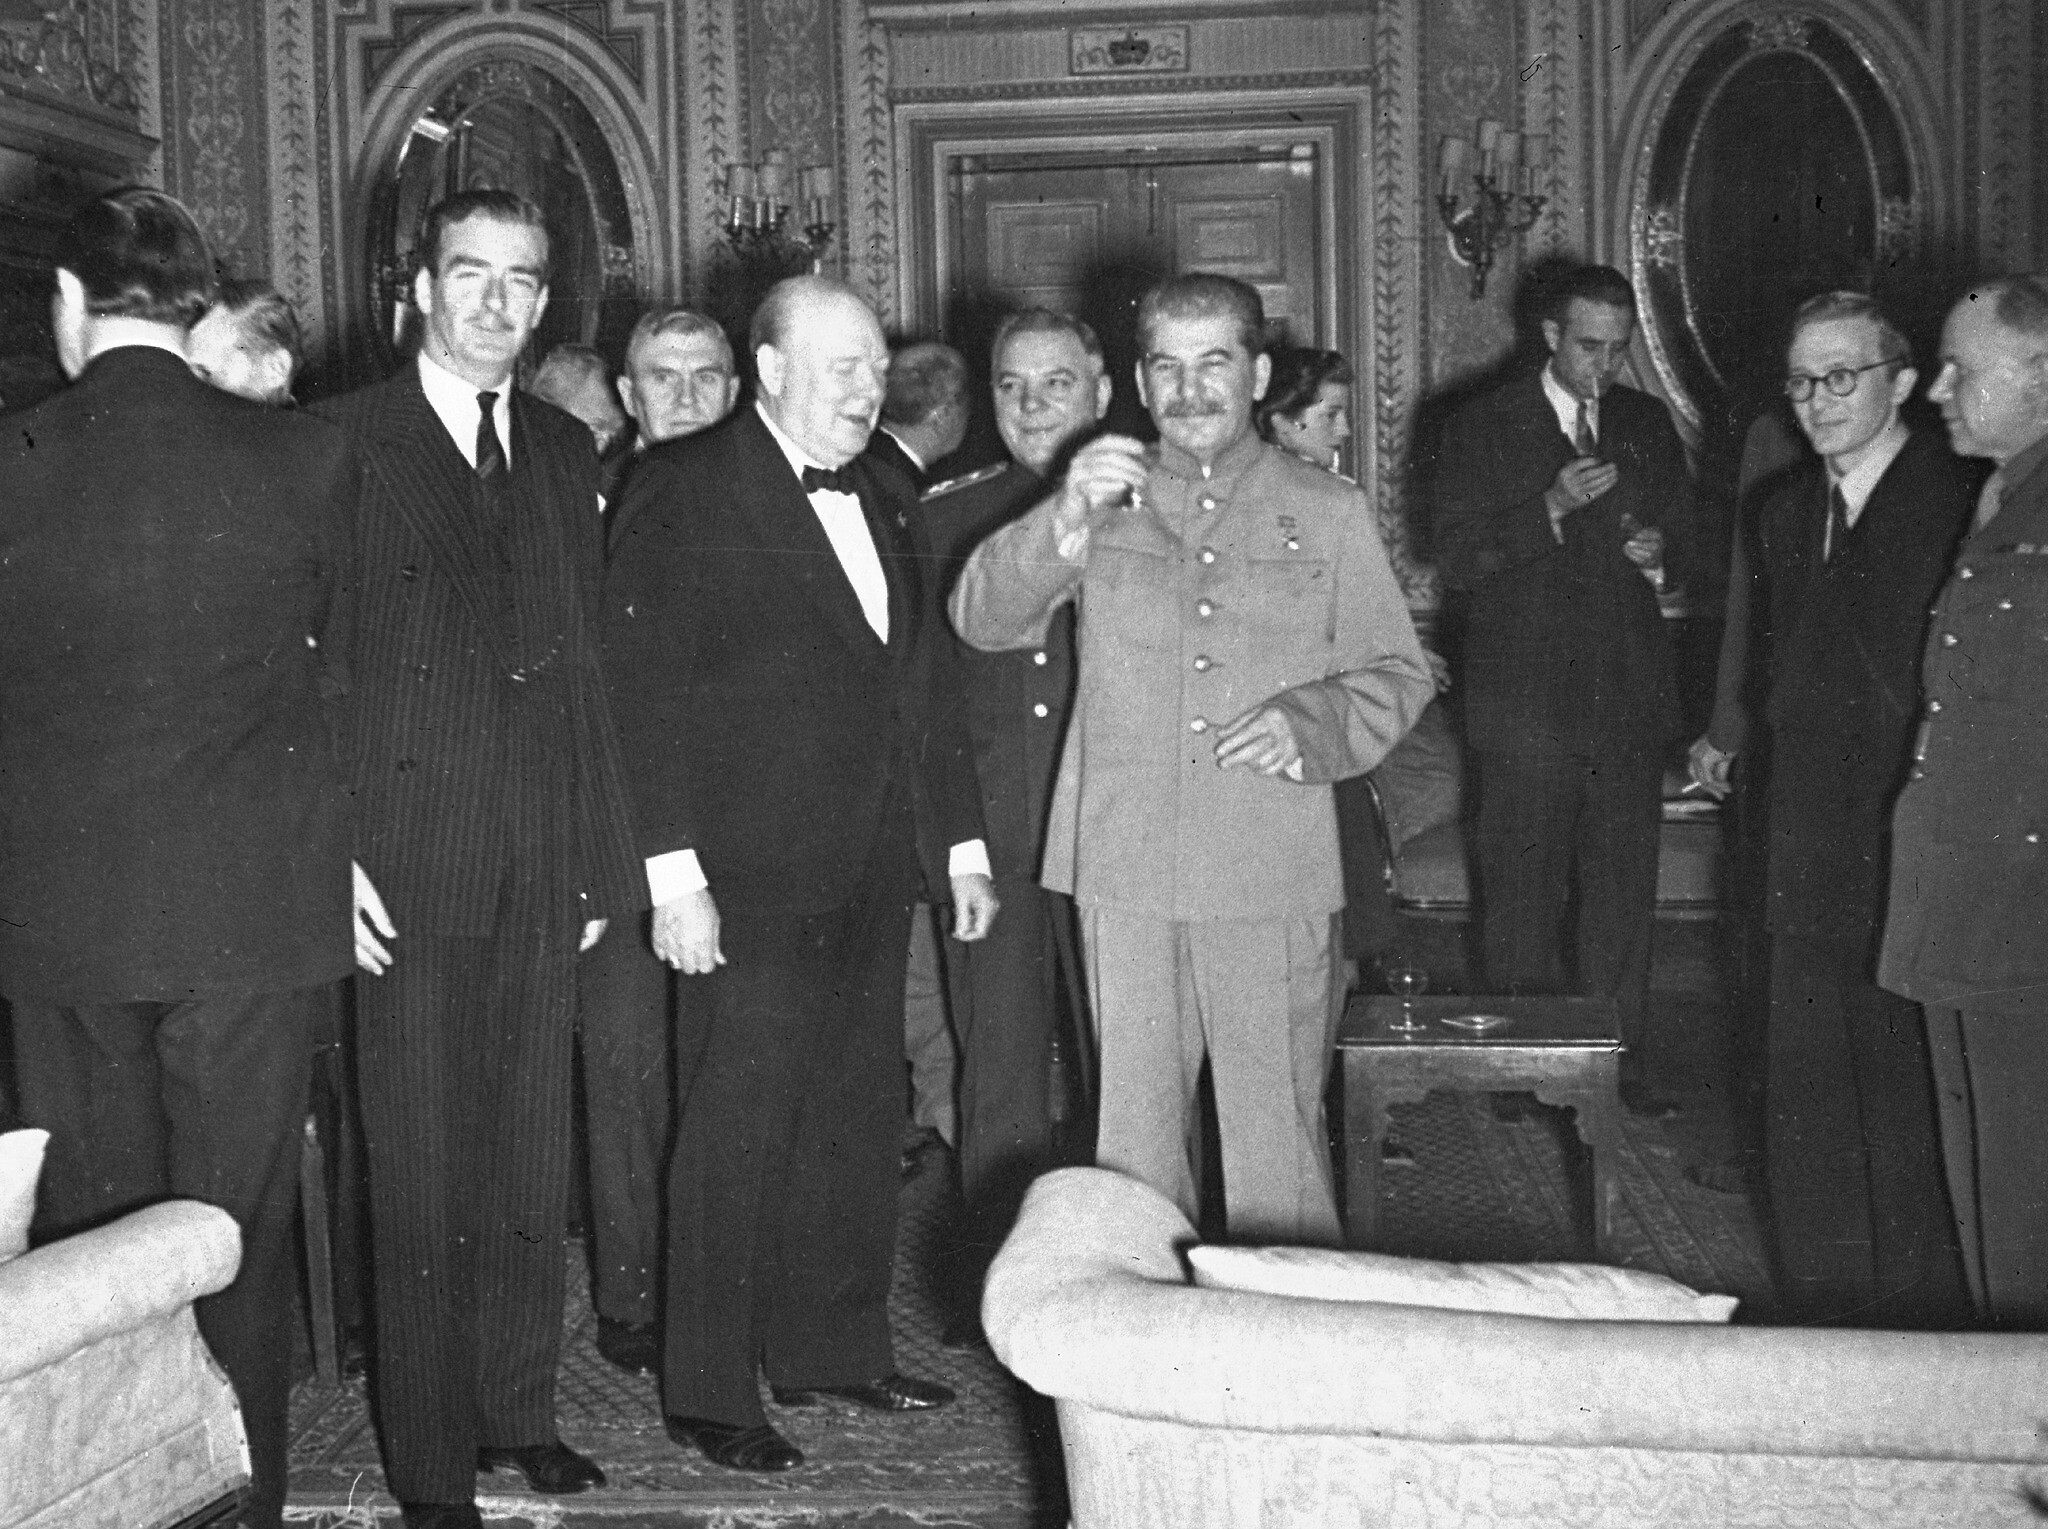 Joseph Stalin, standing with Winston Churchill and British foreign minister Anthony Eden, makes at toast at Churchill's 69th birthday party in Tehran, Iran, November 30, 1943. (AP Photo)